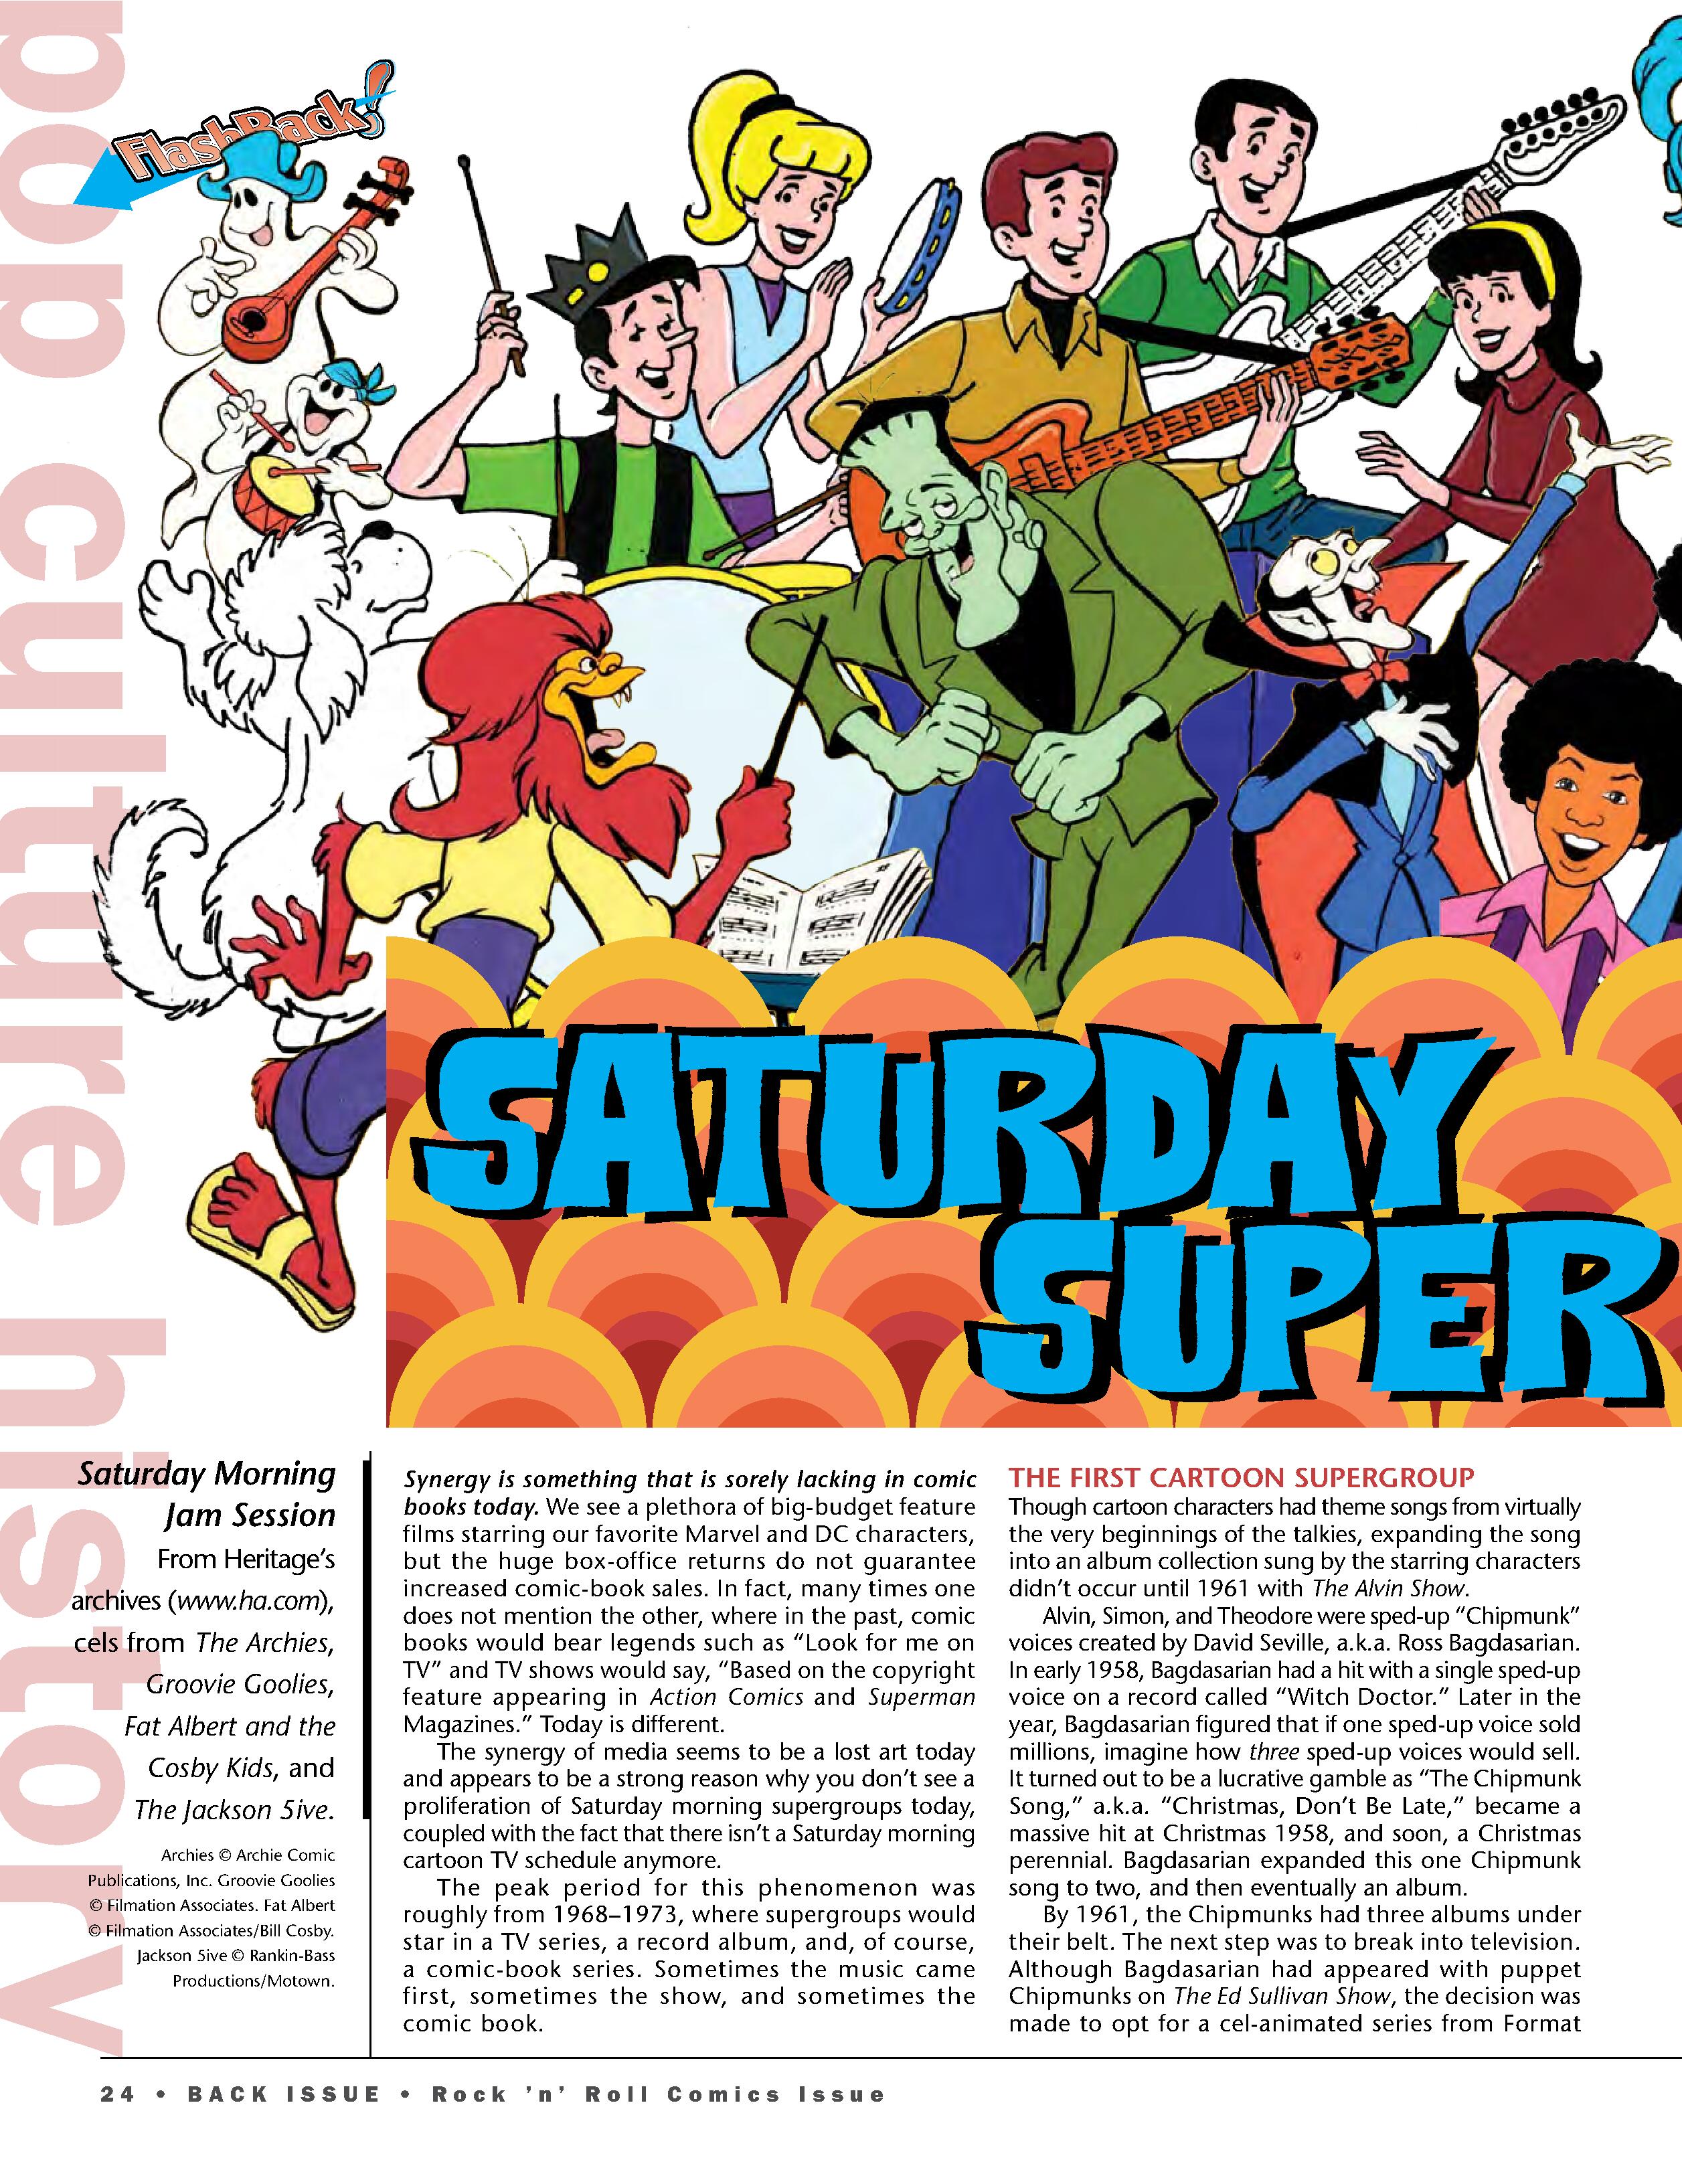 Read online Back Issue comic -  Issue #101 - 26